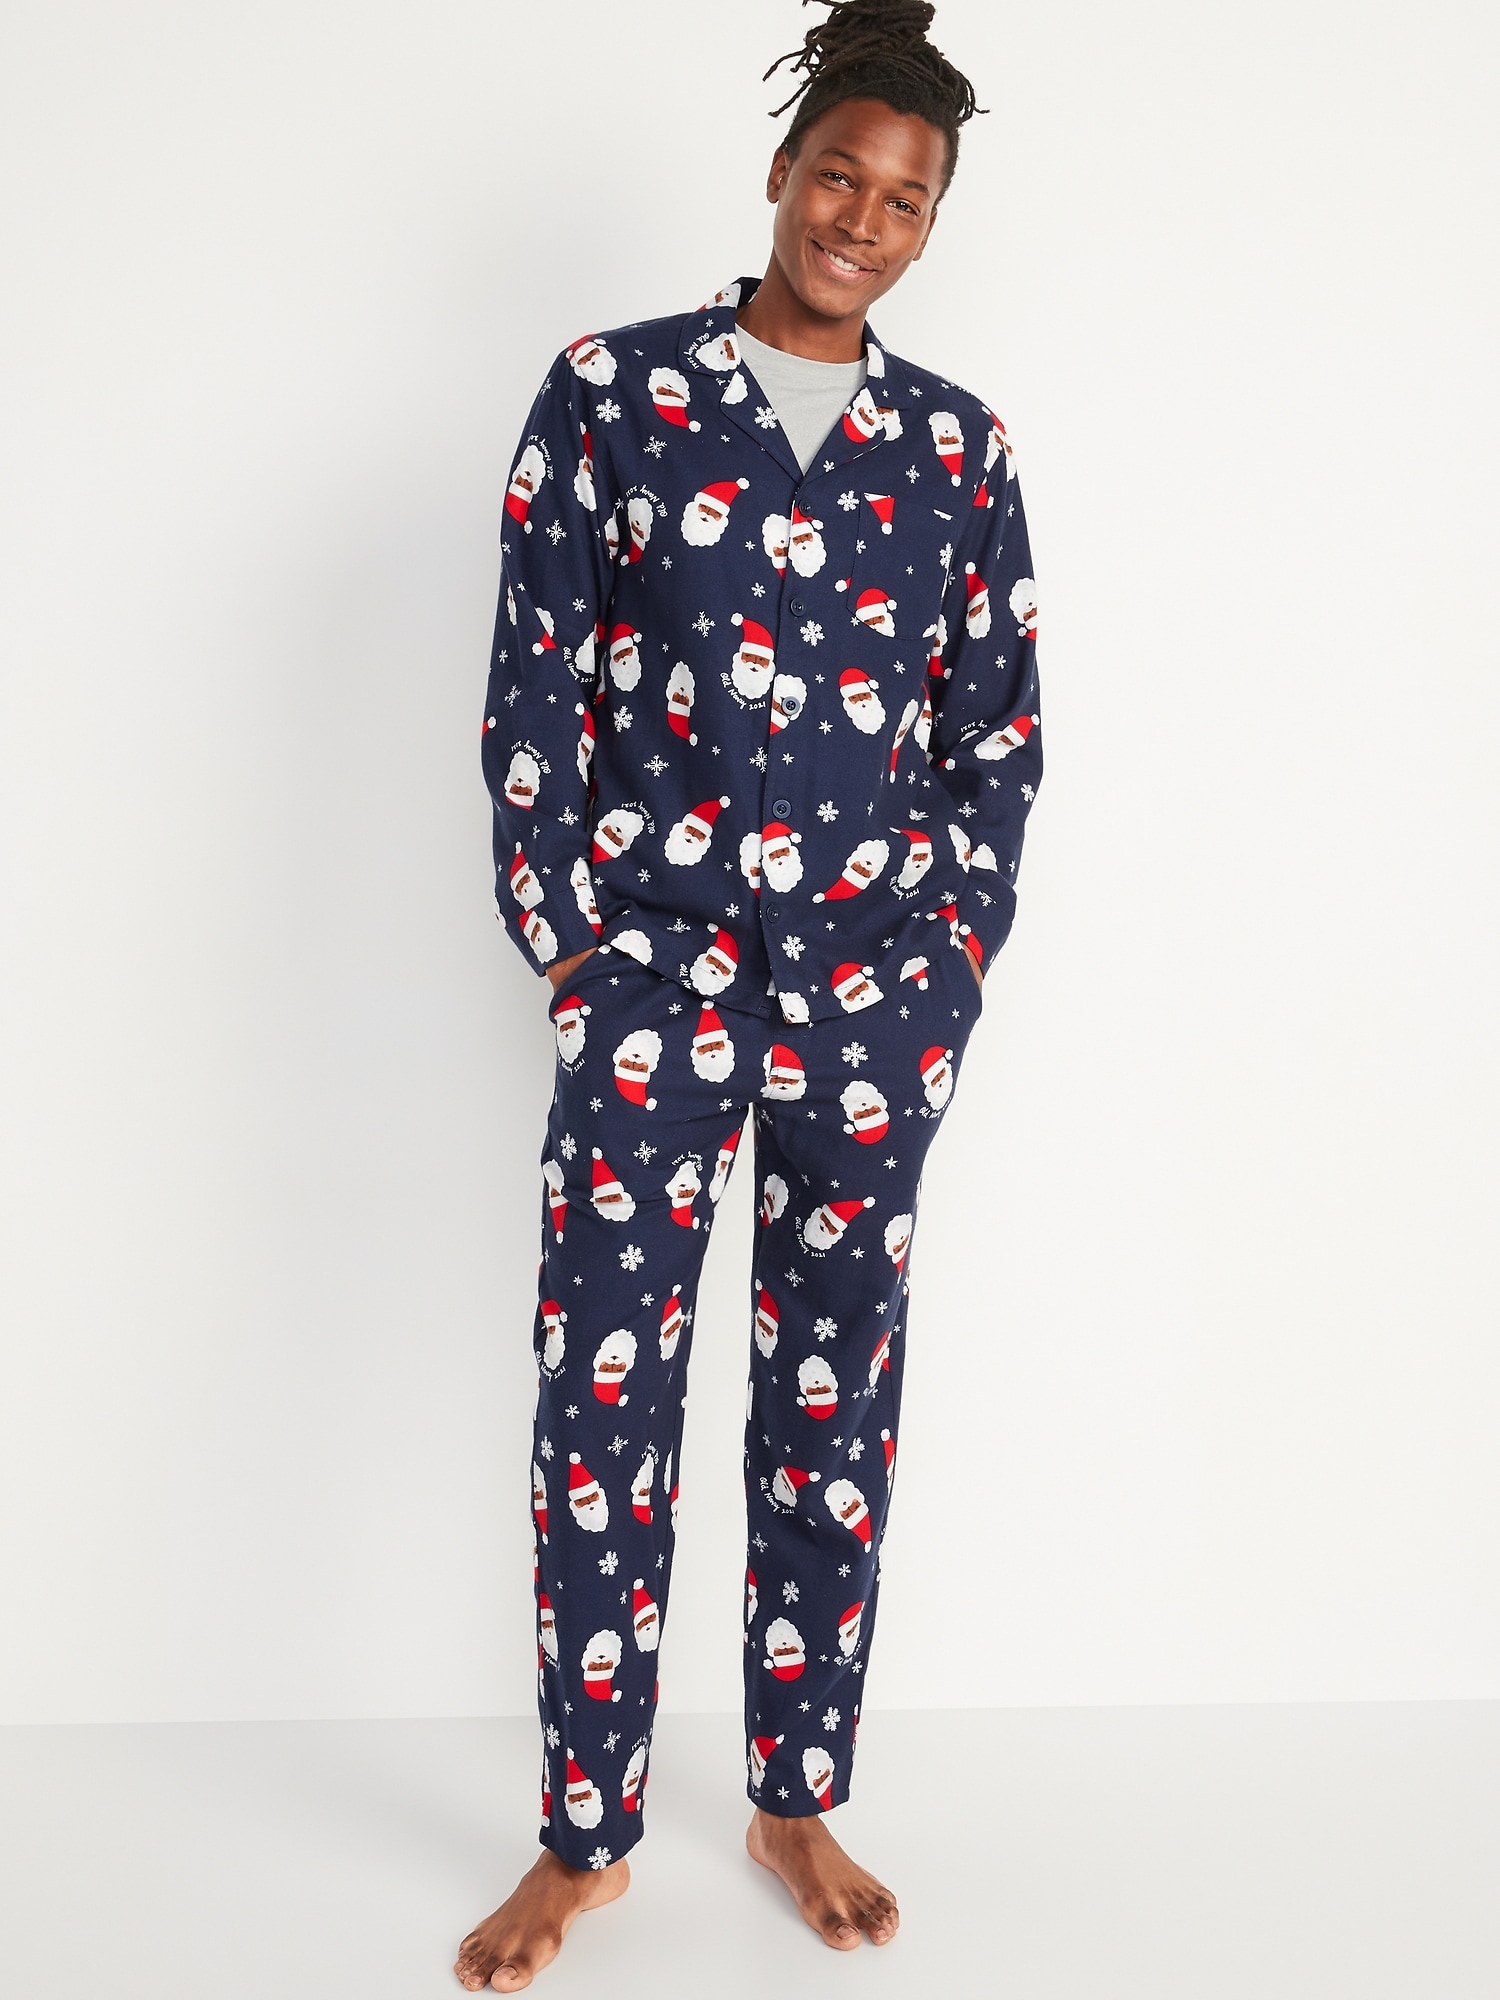 The Best Pajamas from Gap 2021